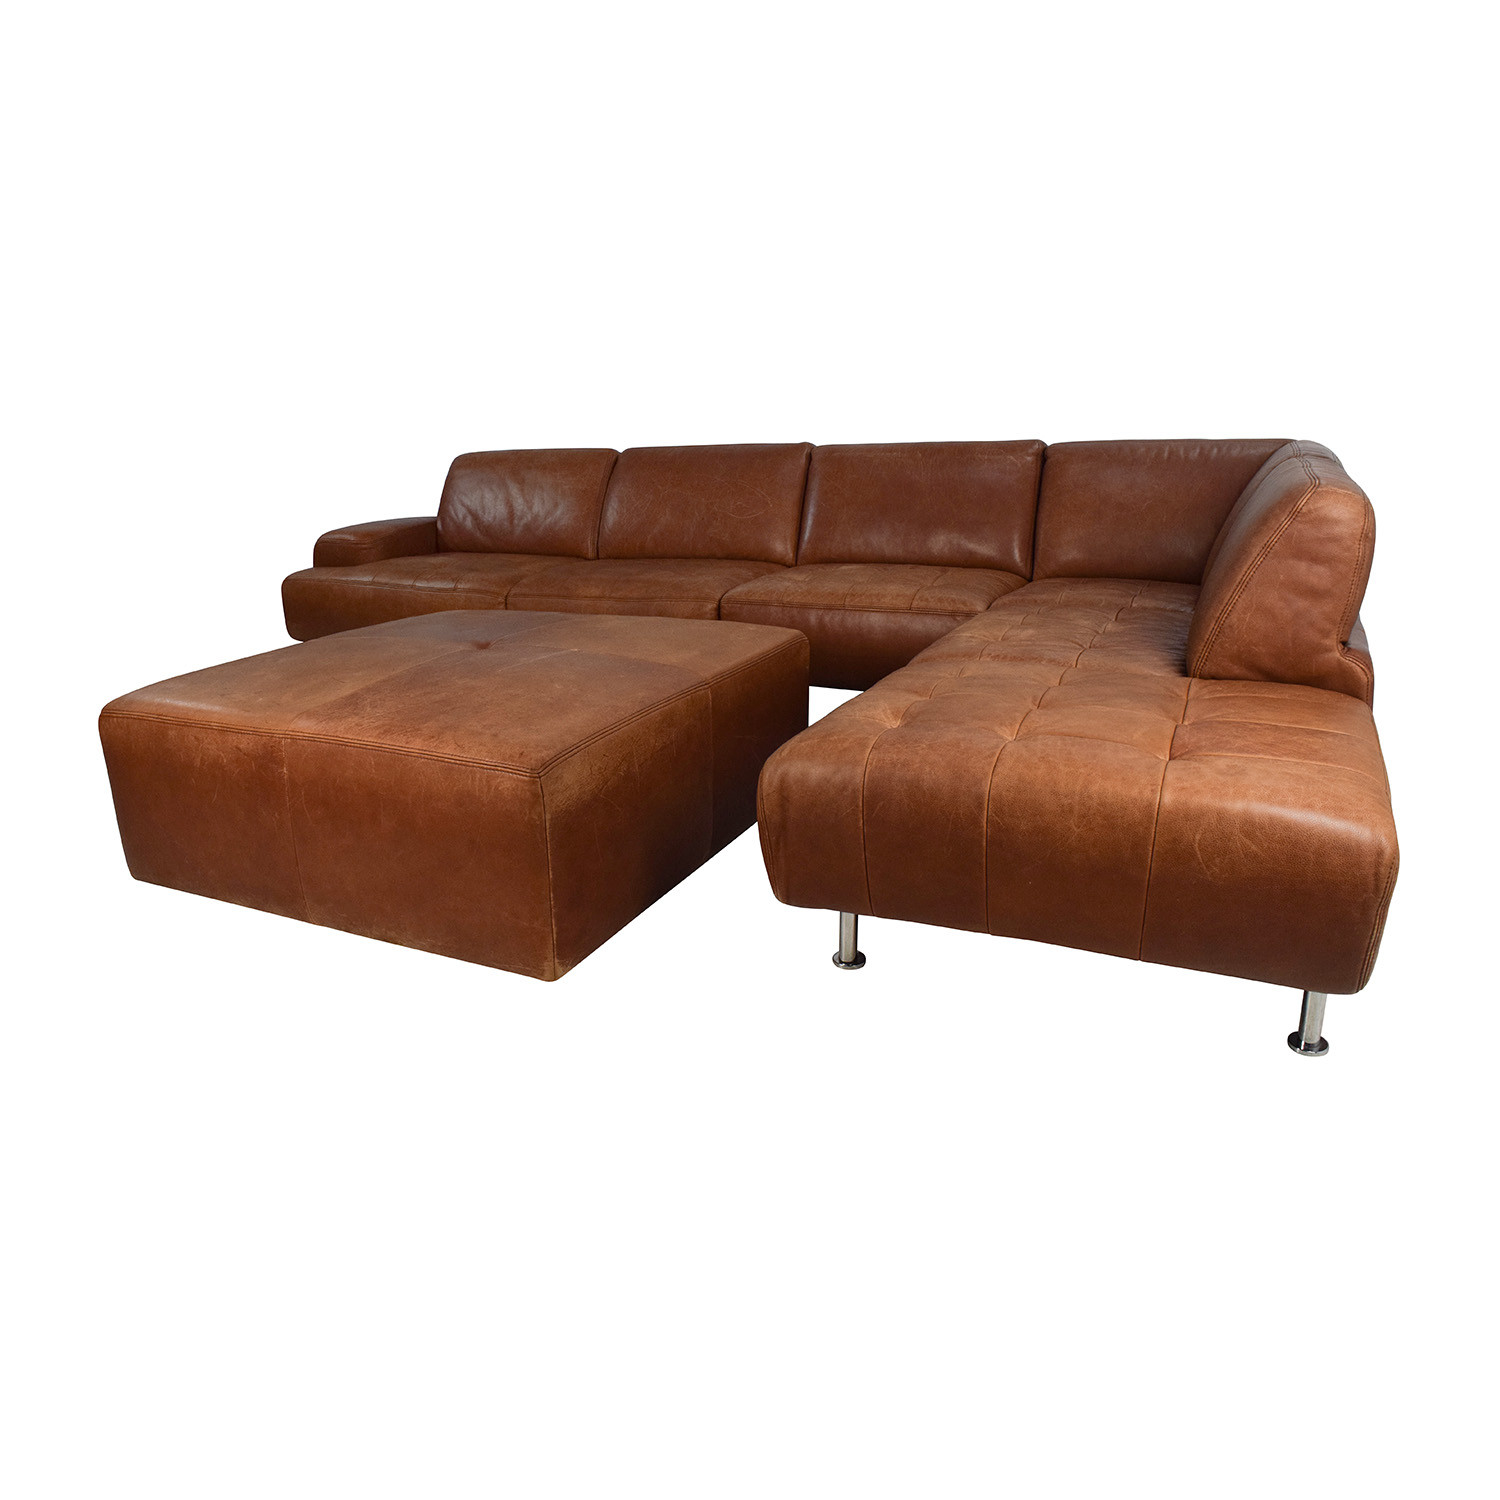 W Schillig Sofa
 OFF W Schillig W Schillig Leather Sectional and